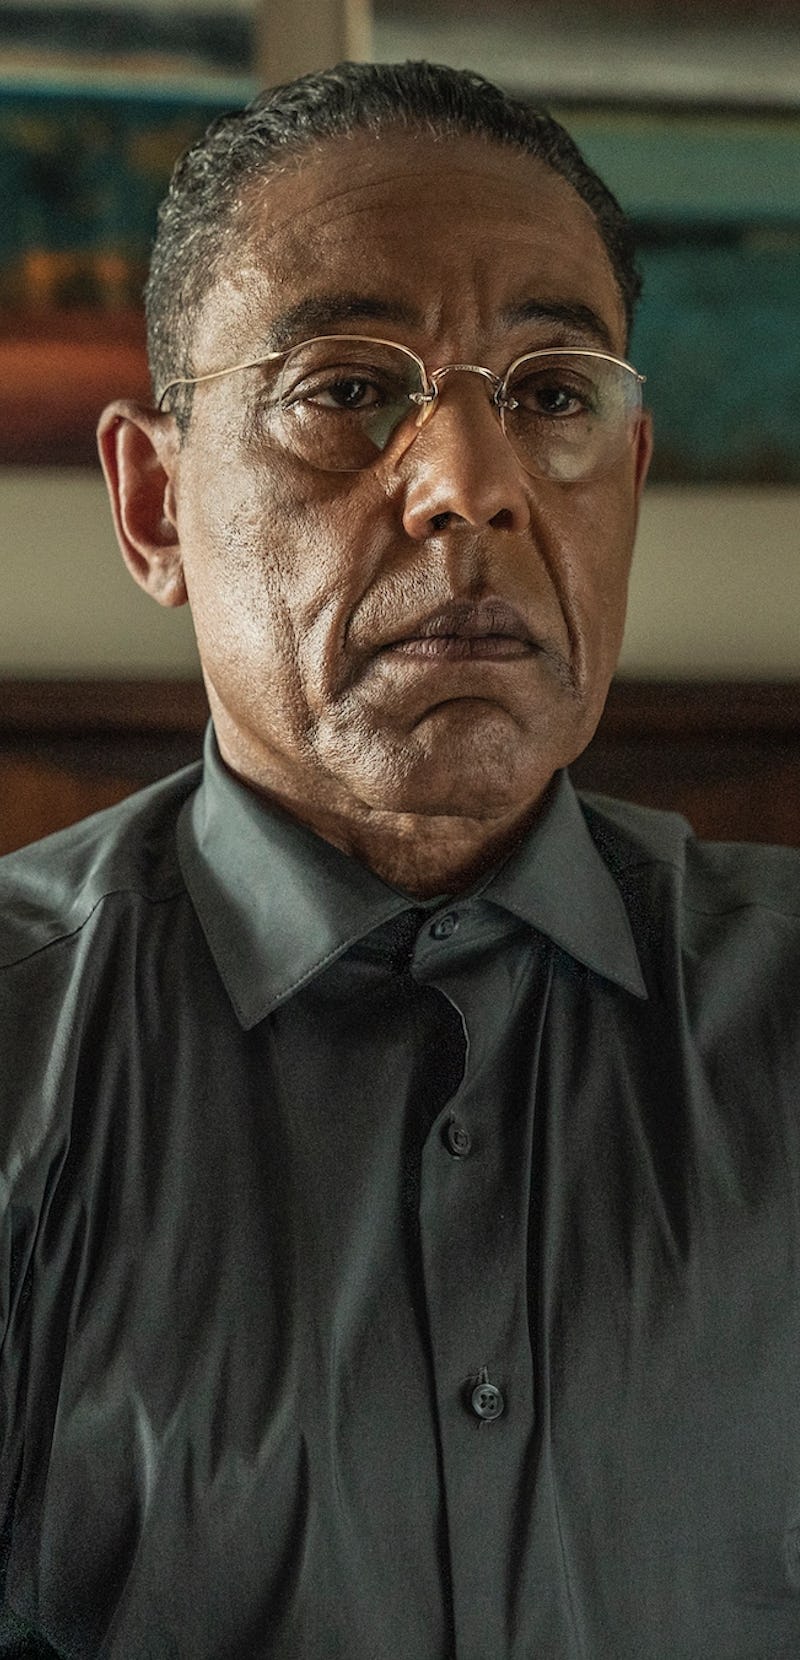 screenshot of Giancarlo Esposito as Gus Fring in Better Call Saul